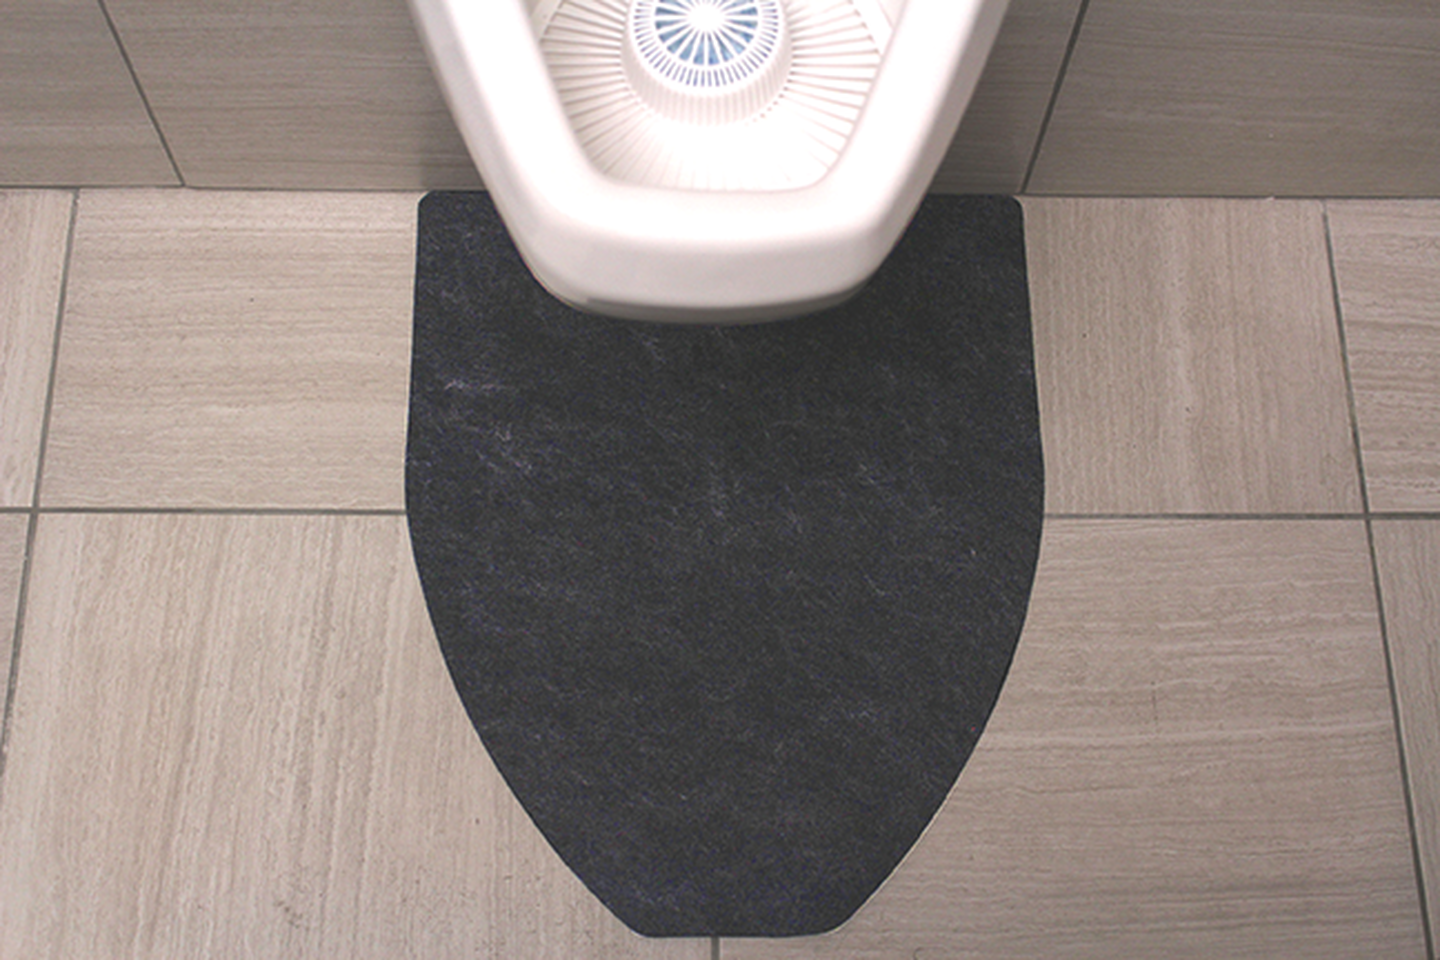 Reasons Facility Managers Should View Urinal Mats as an Investment